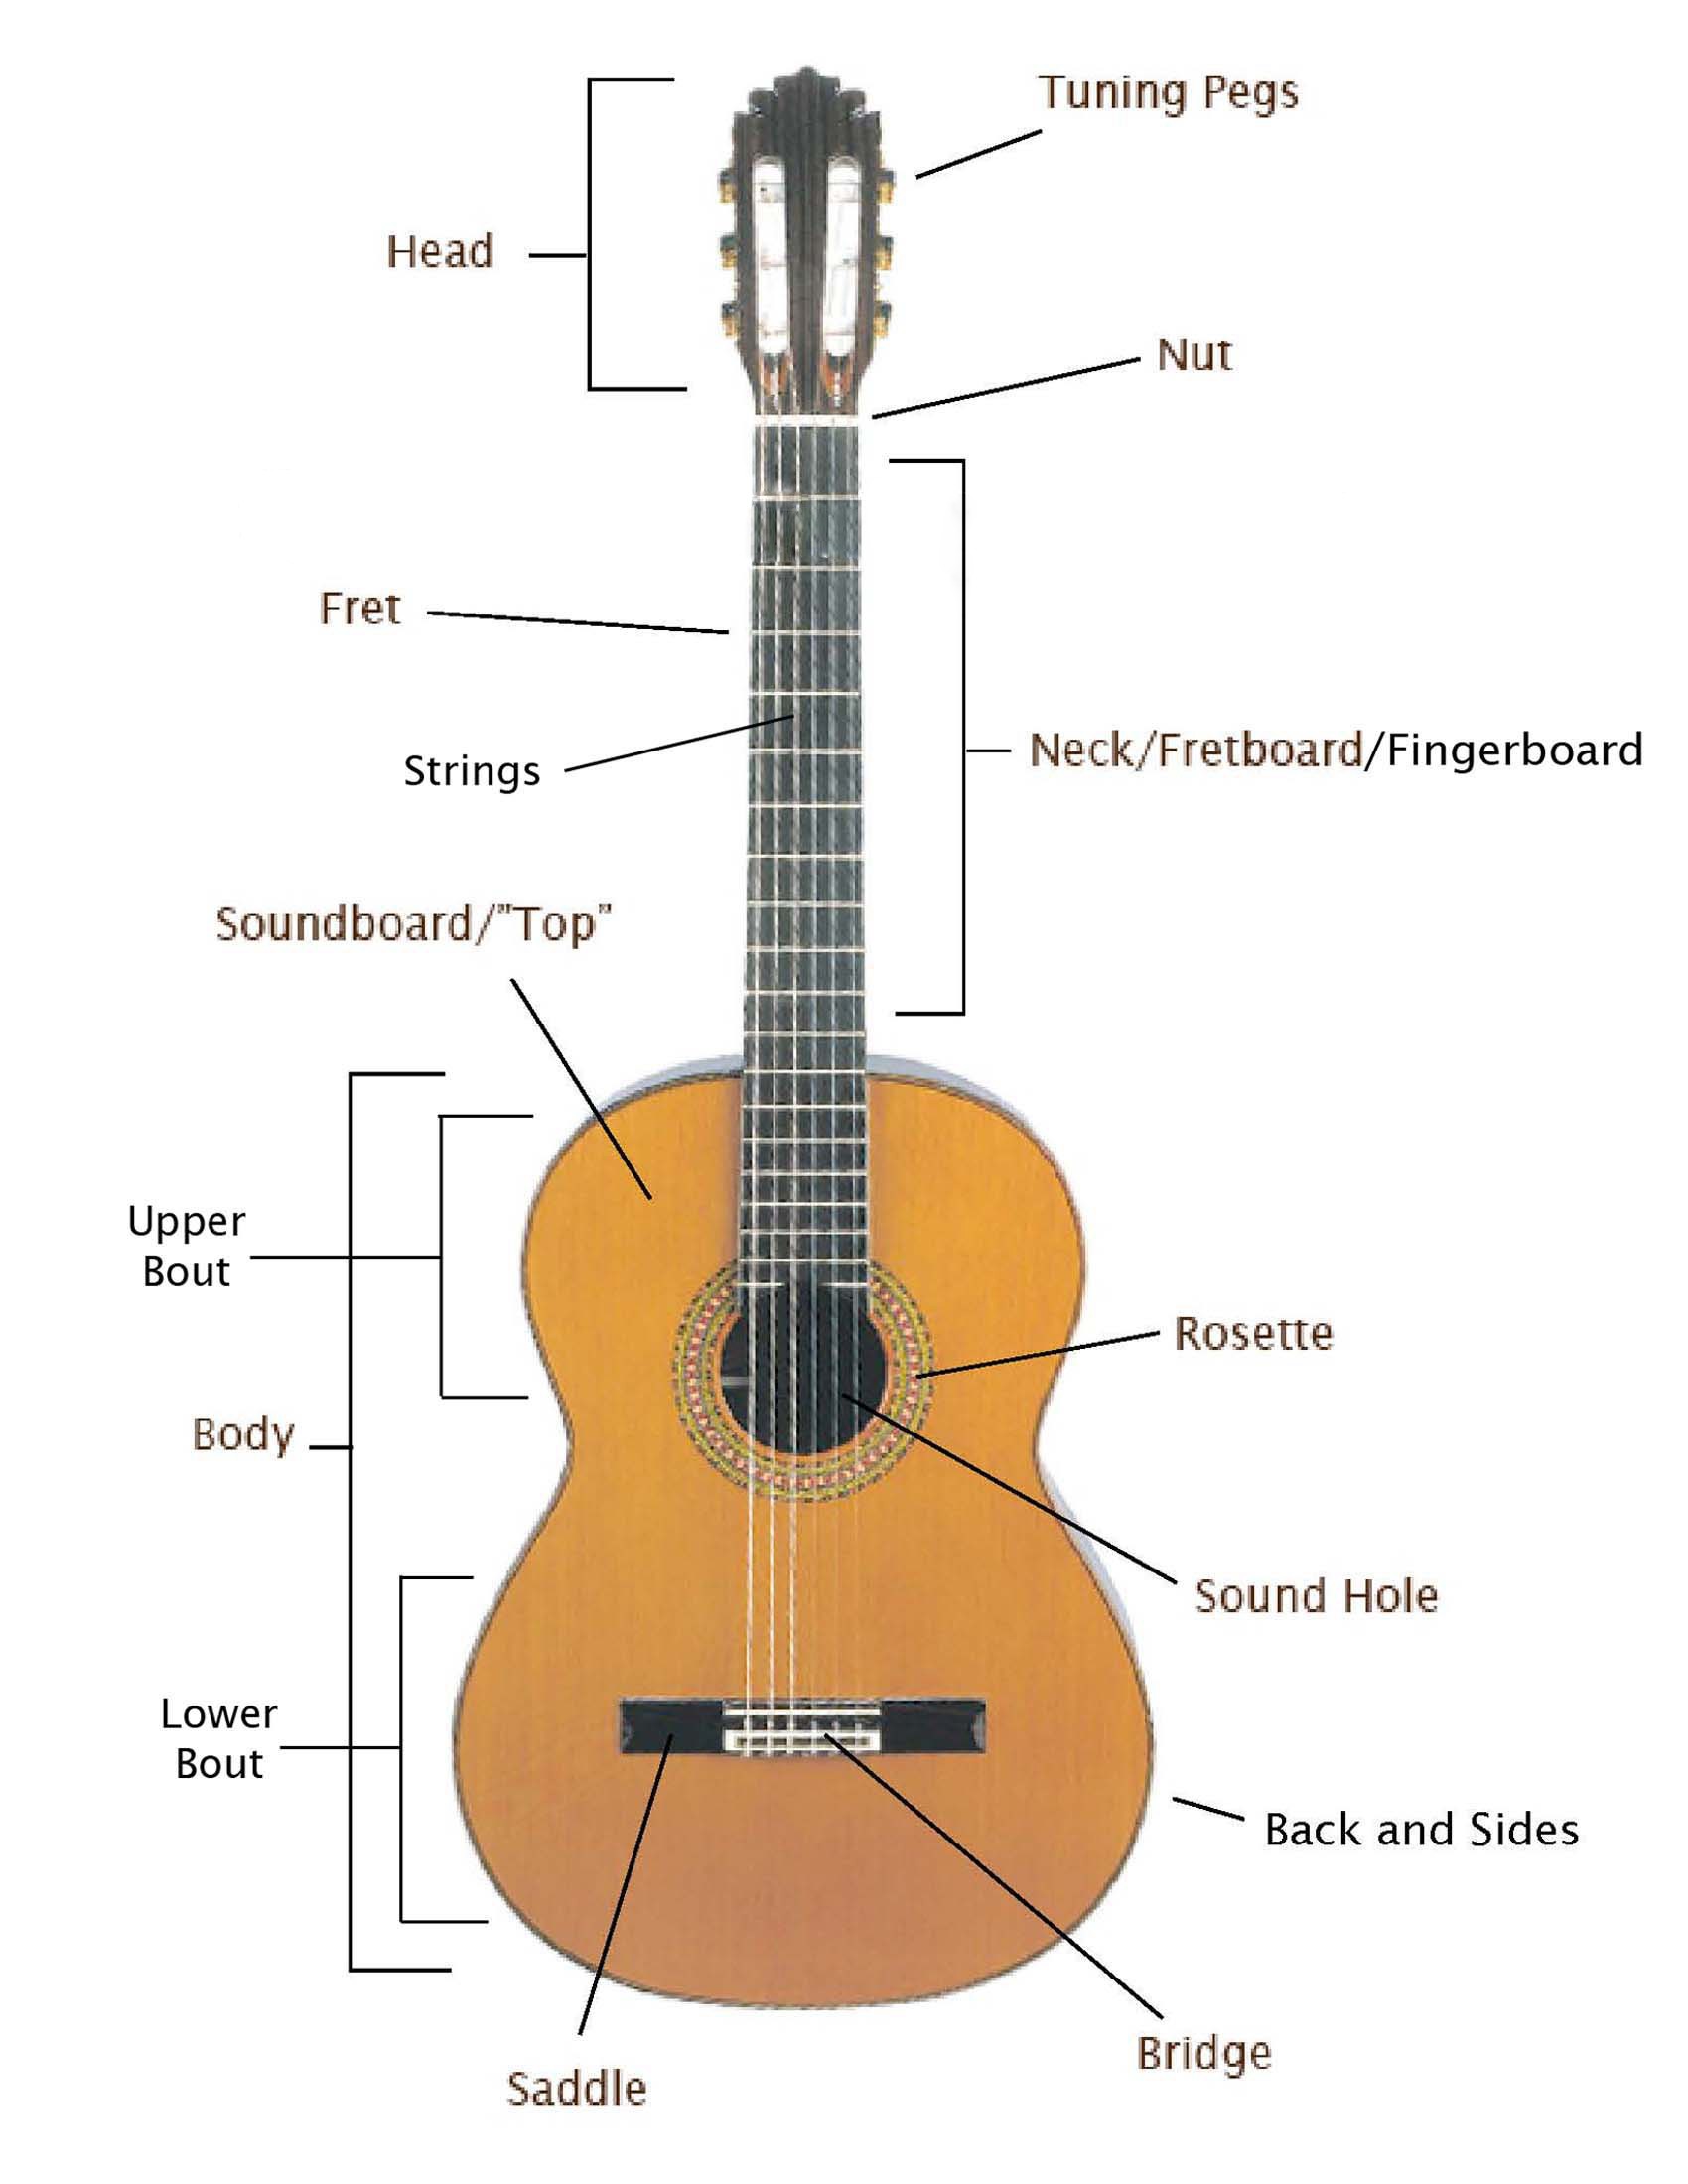 Blog 3 Basic Knowledge of Guitar The Definitions of Guitar Parts